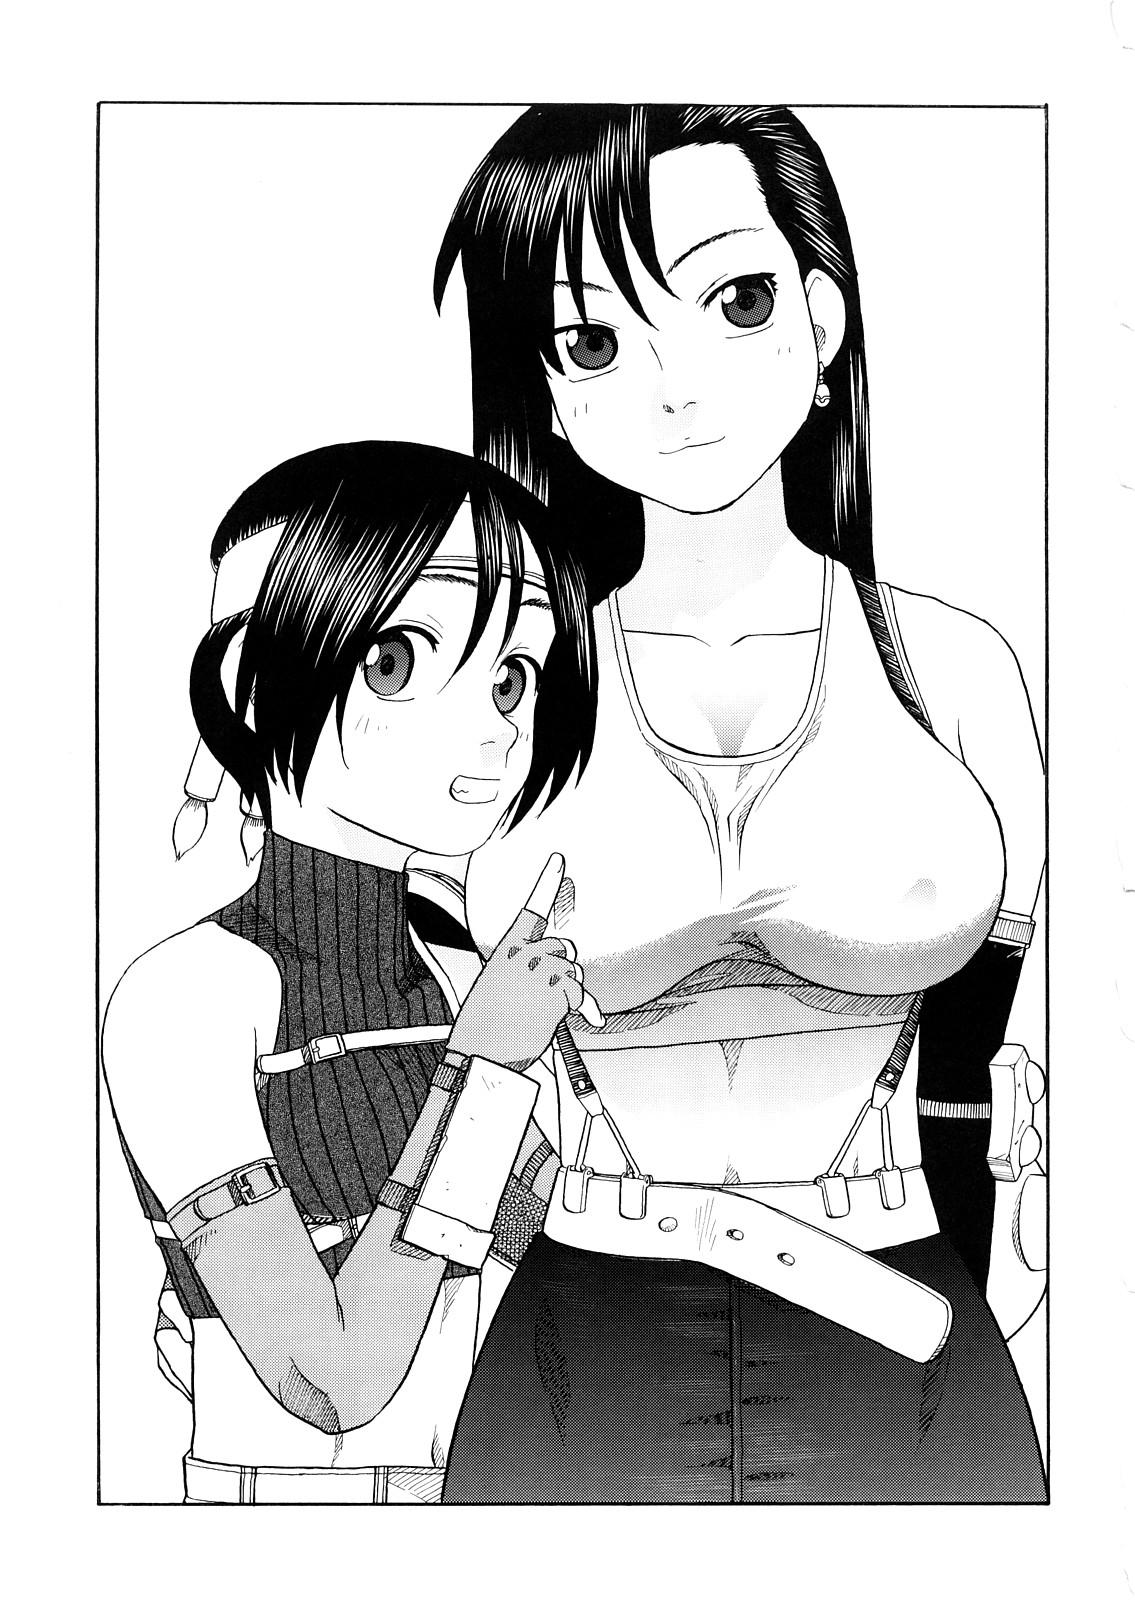 Milf Fuck Tifa to Yuffie to Yojouhan - Final fantasy vii Jerk Off Instruction - Page 2